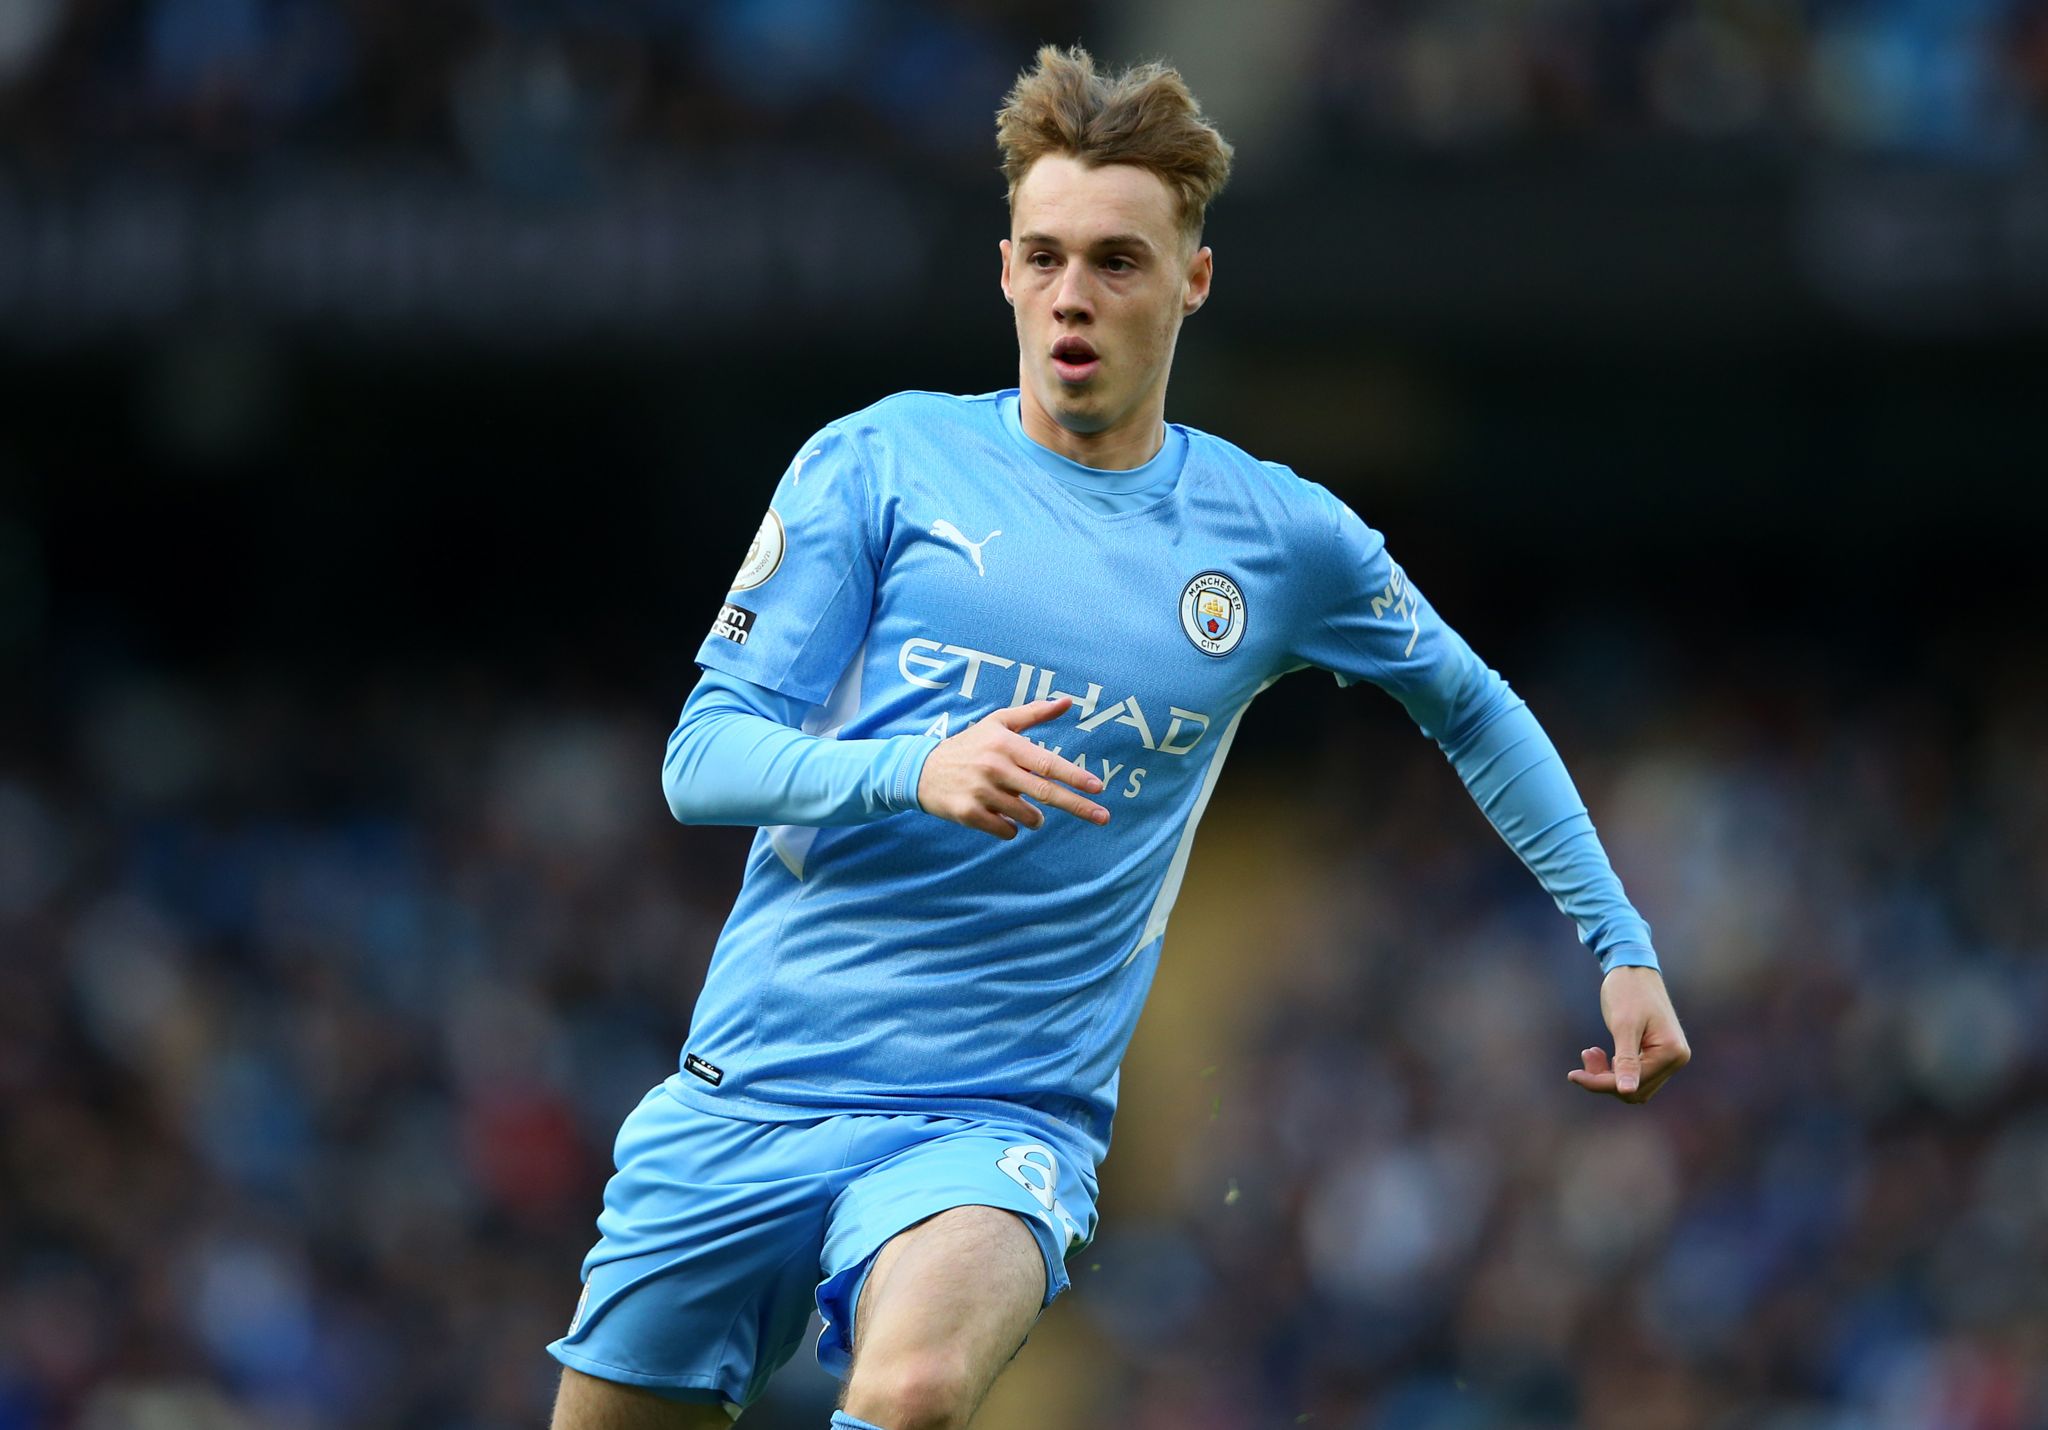  Cole Palmer of Manchester City and Alejandro Garnacho of Manchester United are two of the most exciting young wingers in the Premier League.